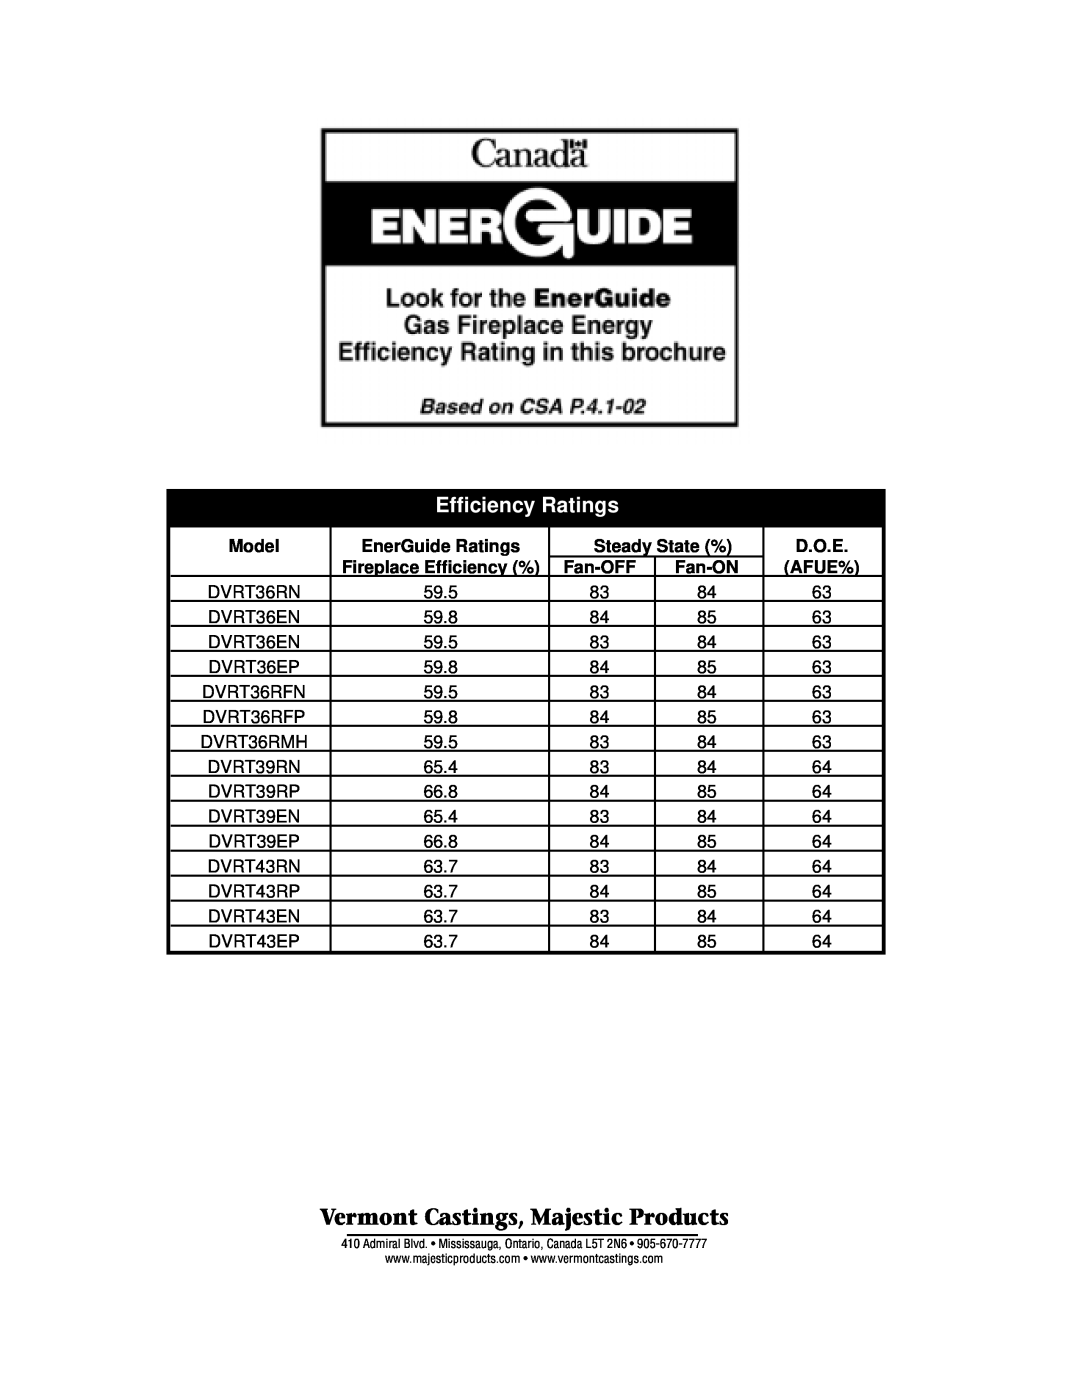 Vermont Casting DVRT39 Efficiency Ratings, Vermont Castings, Majestic Products, Model, EnerGuide Ratings, Steady State % 